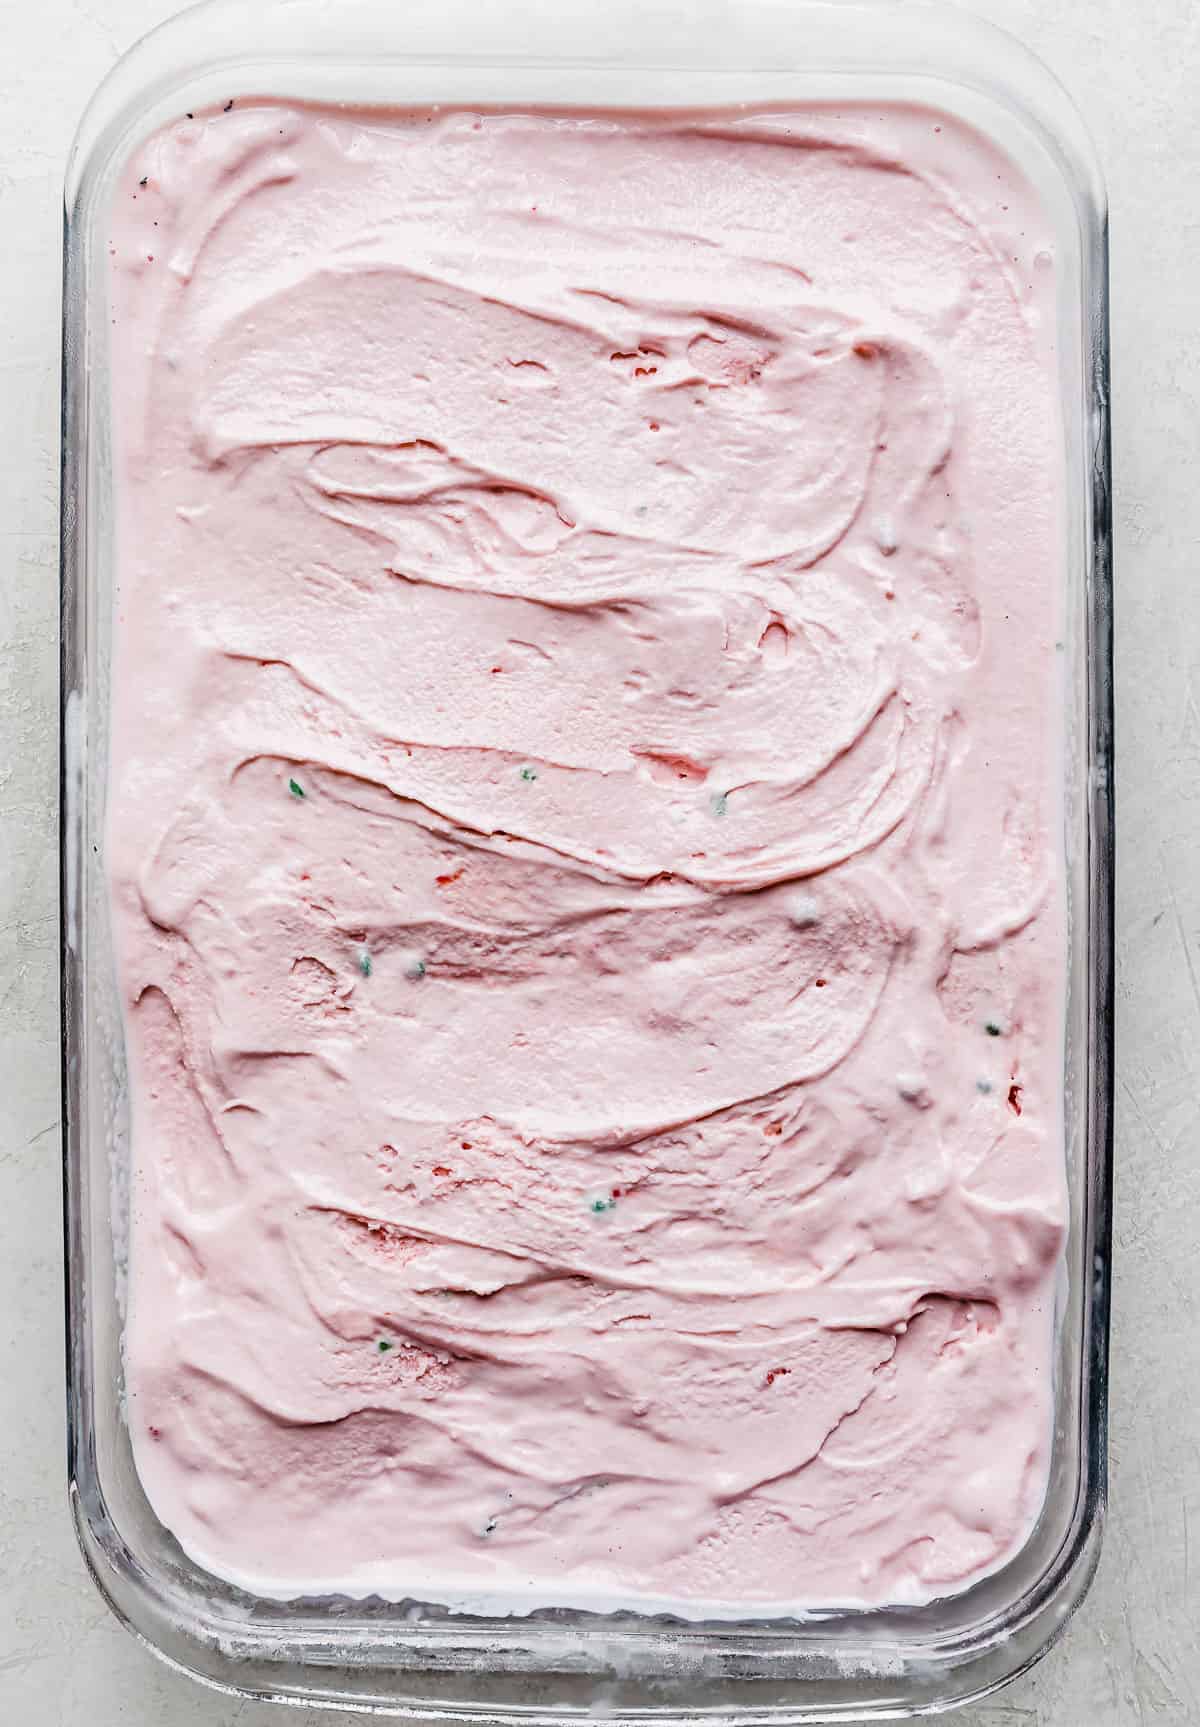 A glass dish with pink peppermint ice cream spread into an even layer.